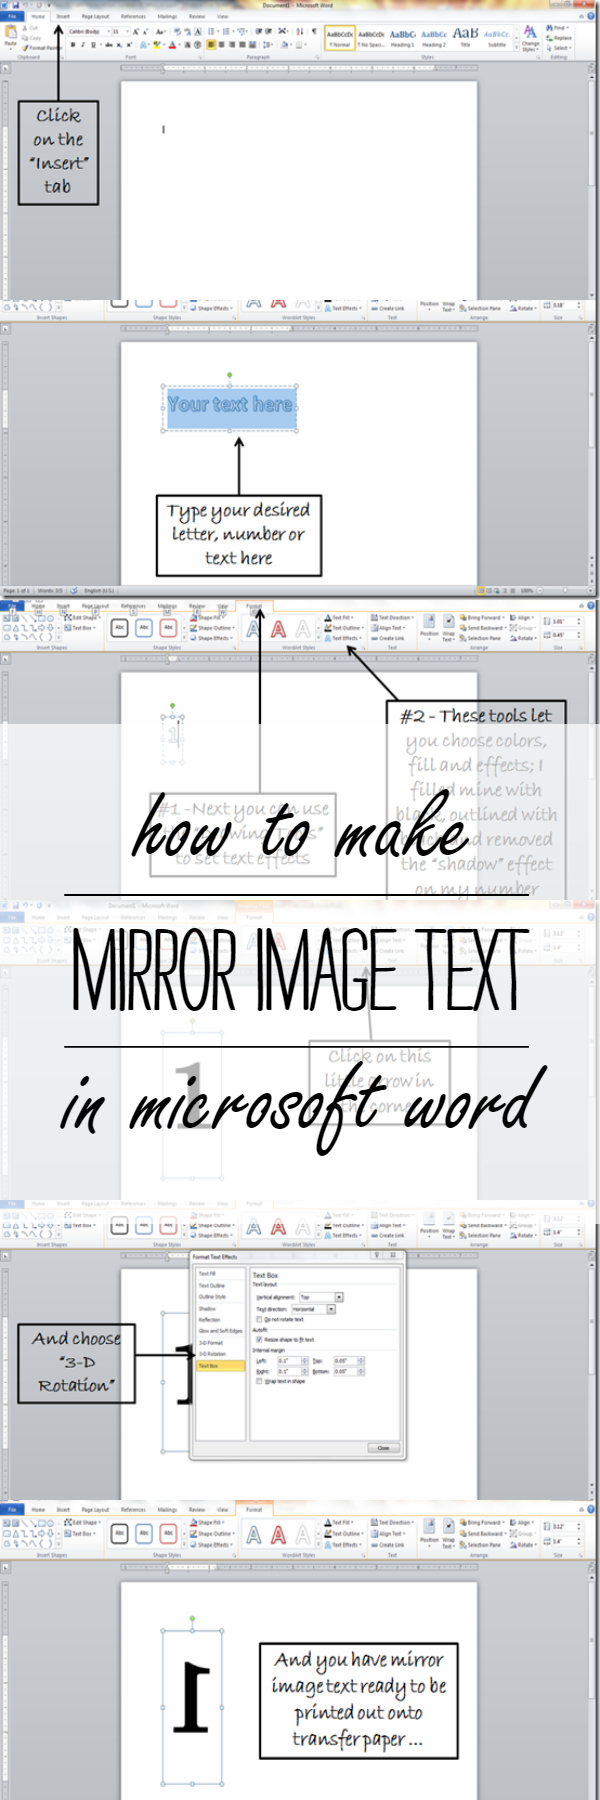 how-to-make-mirror-image-text-in-microsoft-word